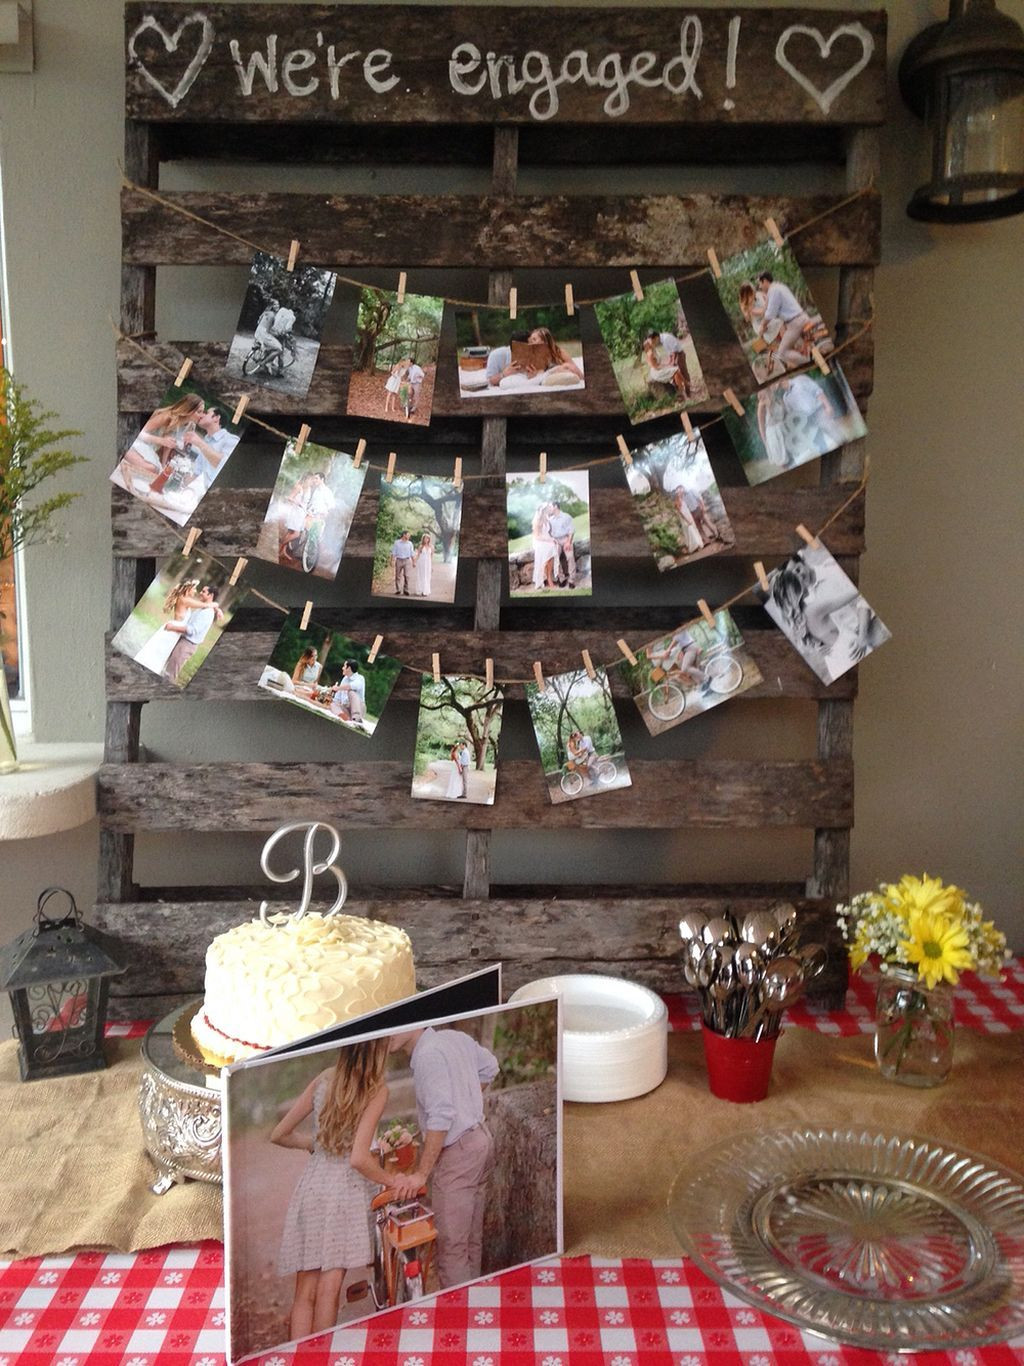 Ideas For A Backyard Engagement Party
 Tips for Looking Your Best on Your Wedding Day